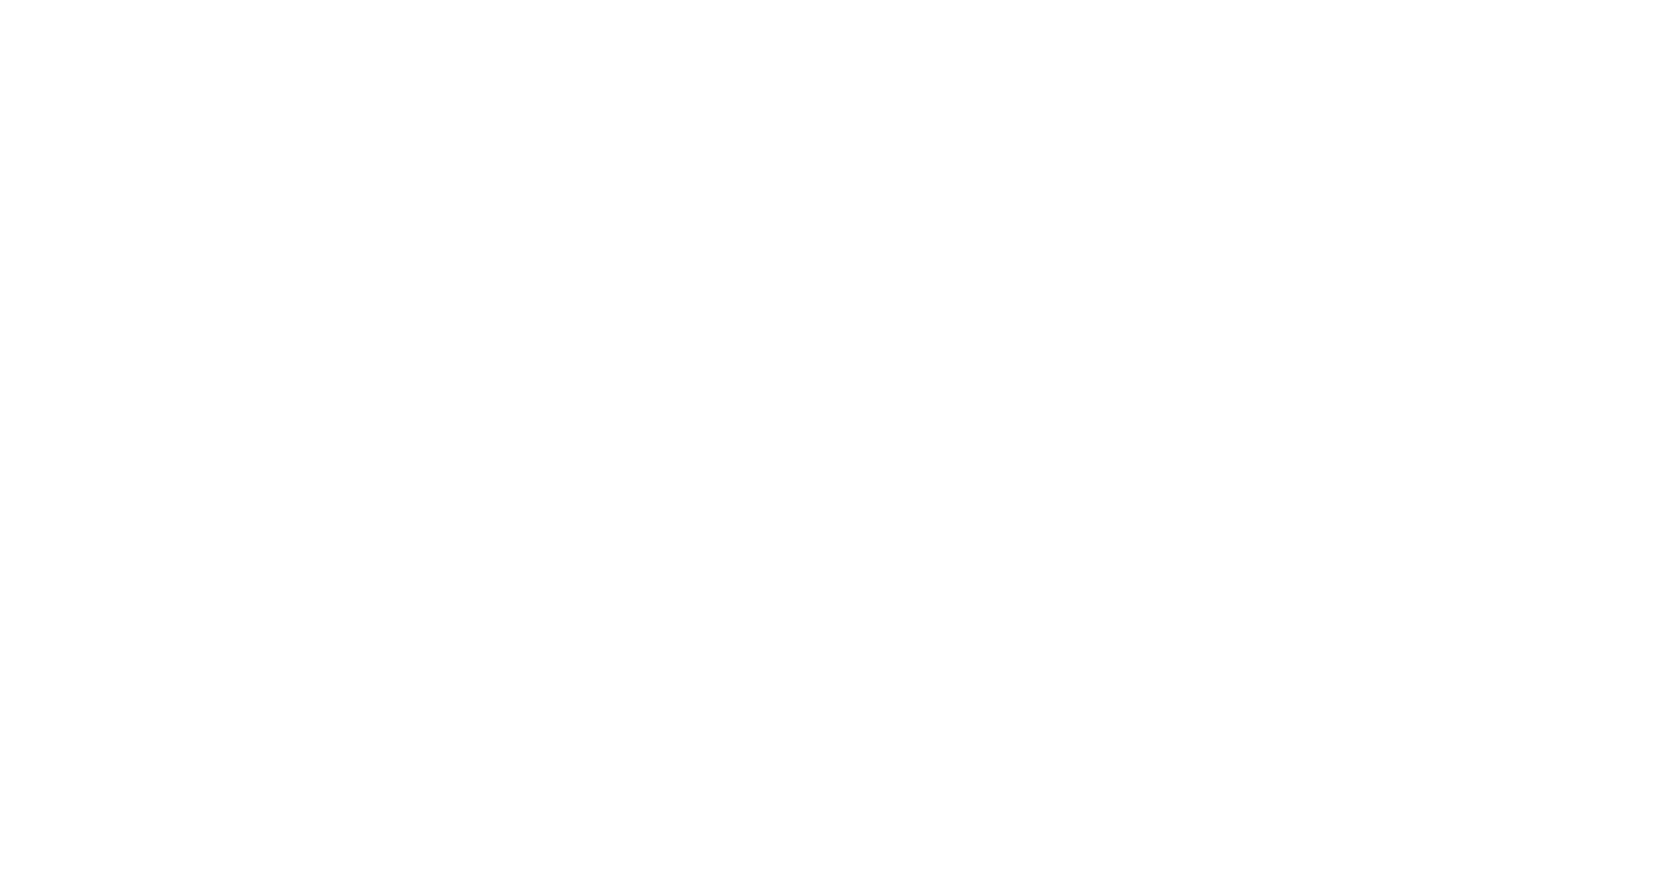 AIMS-Enabled-TM-White